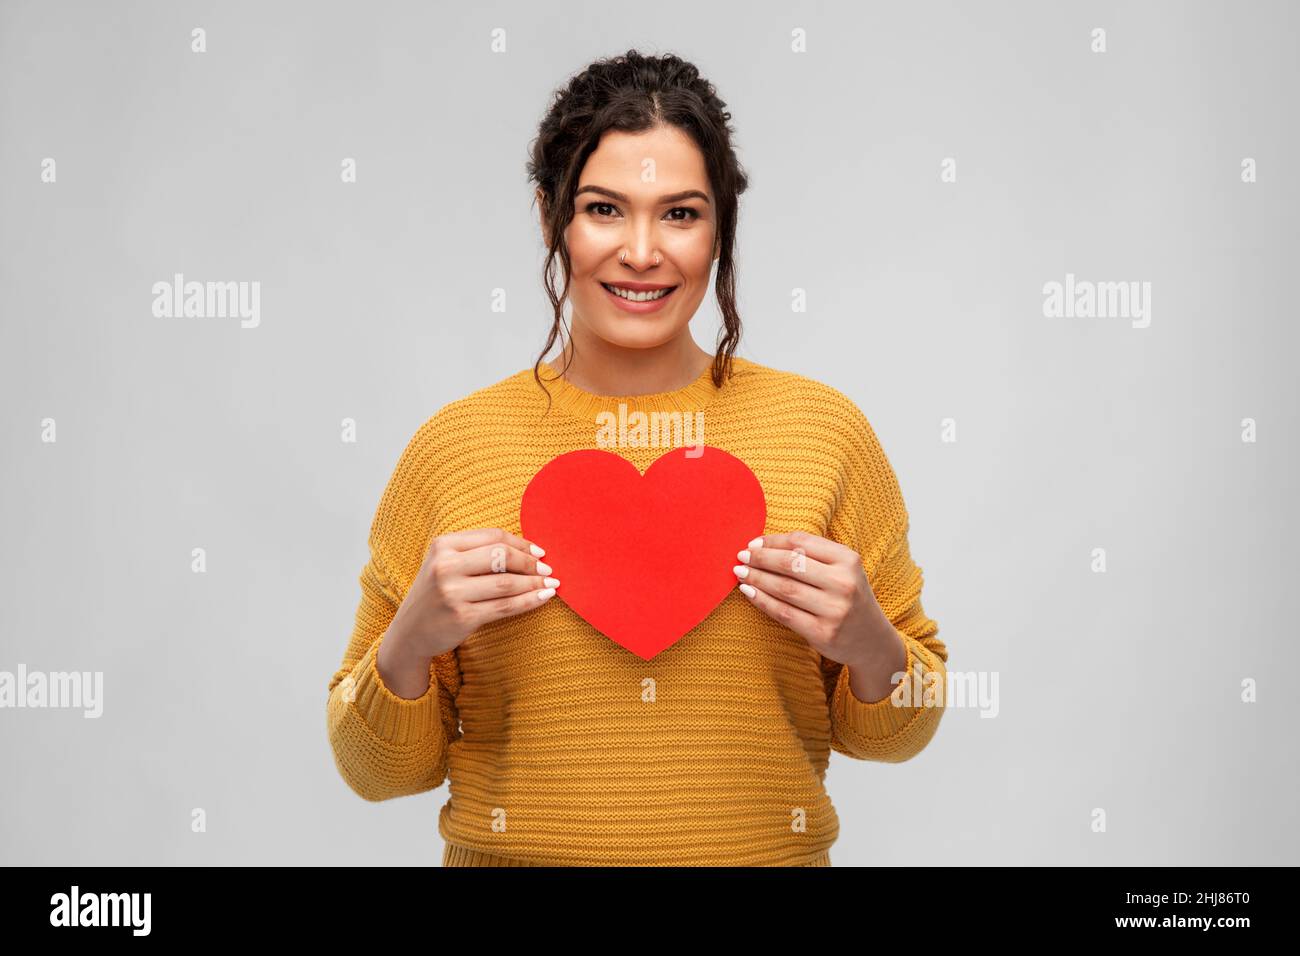 happy smiling young woman with red heart Stock Photo